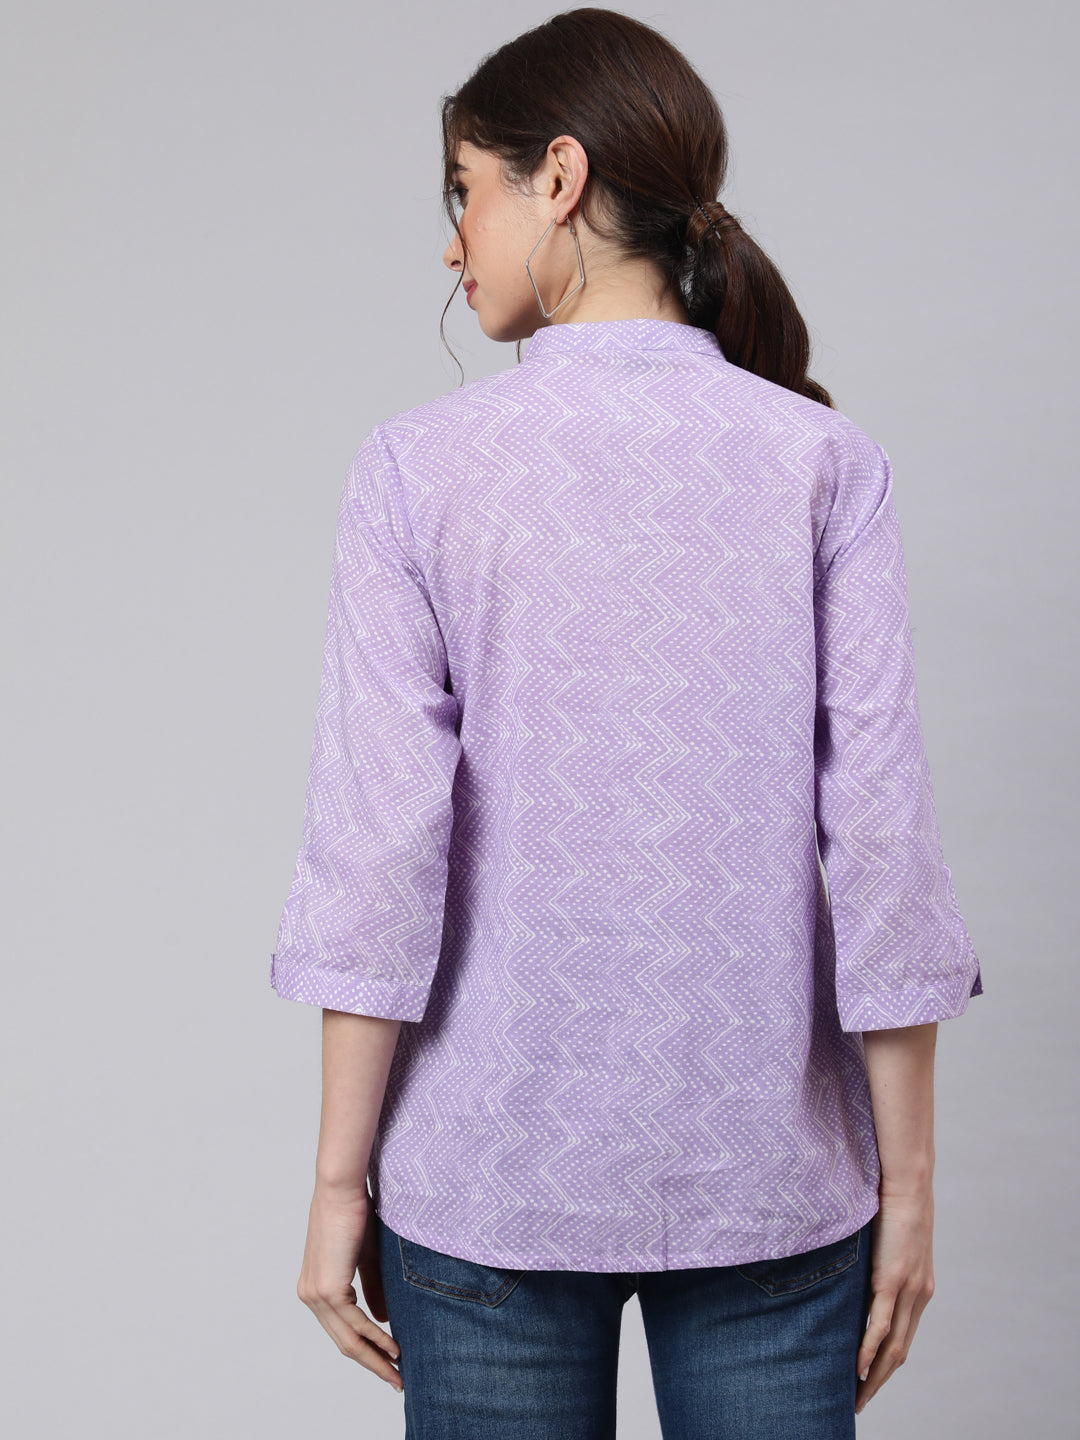 Lavender Zigzag Embroidered Printed Ethnic Shirt